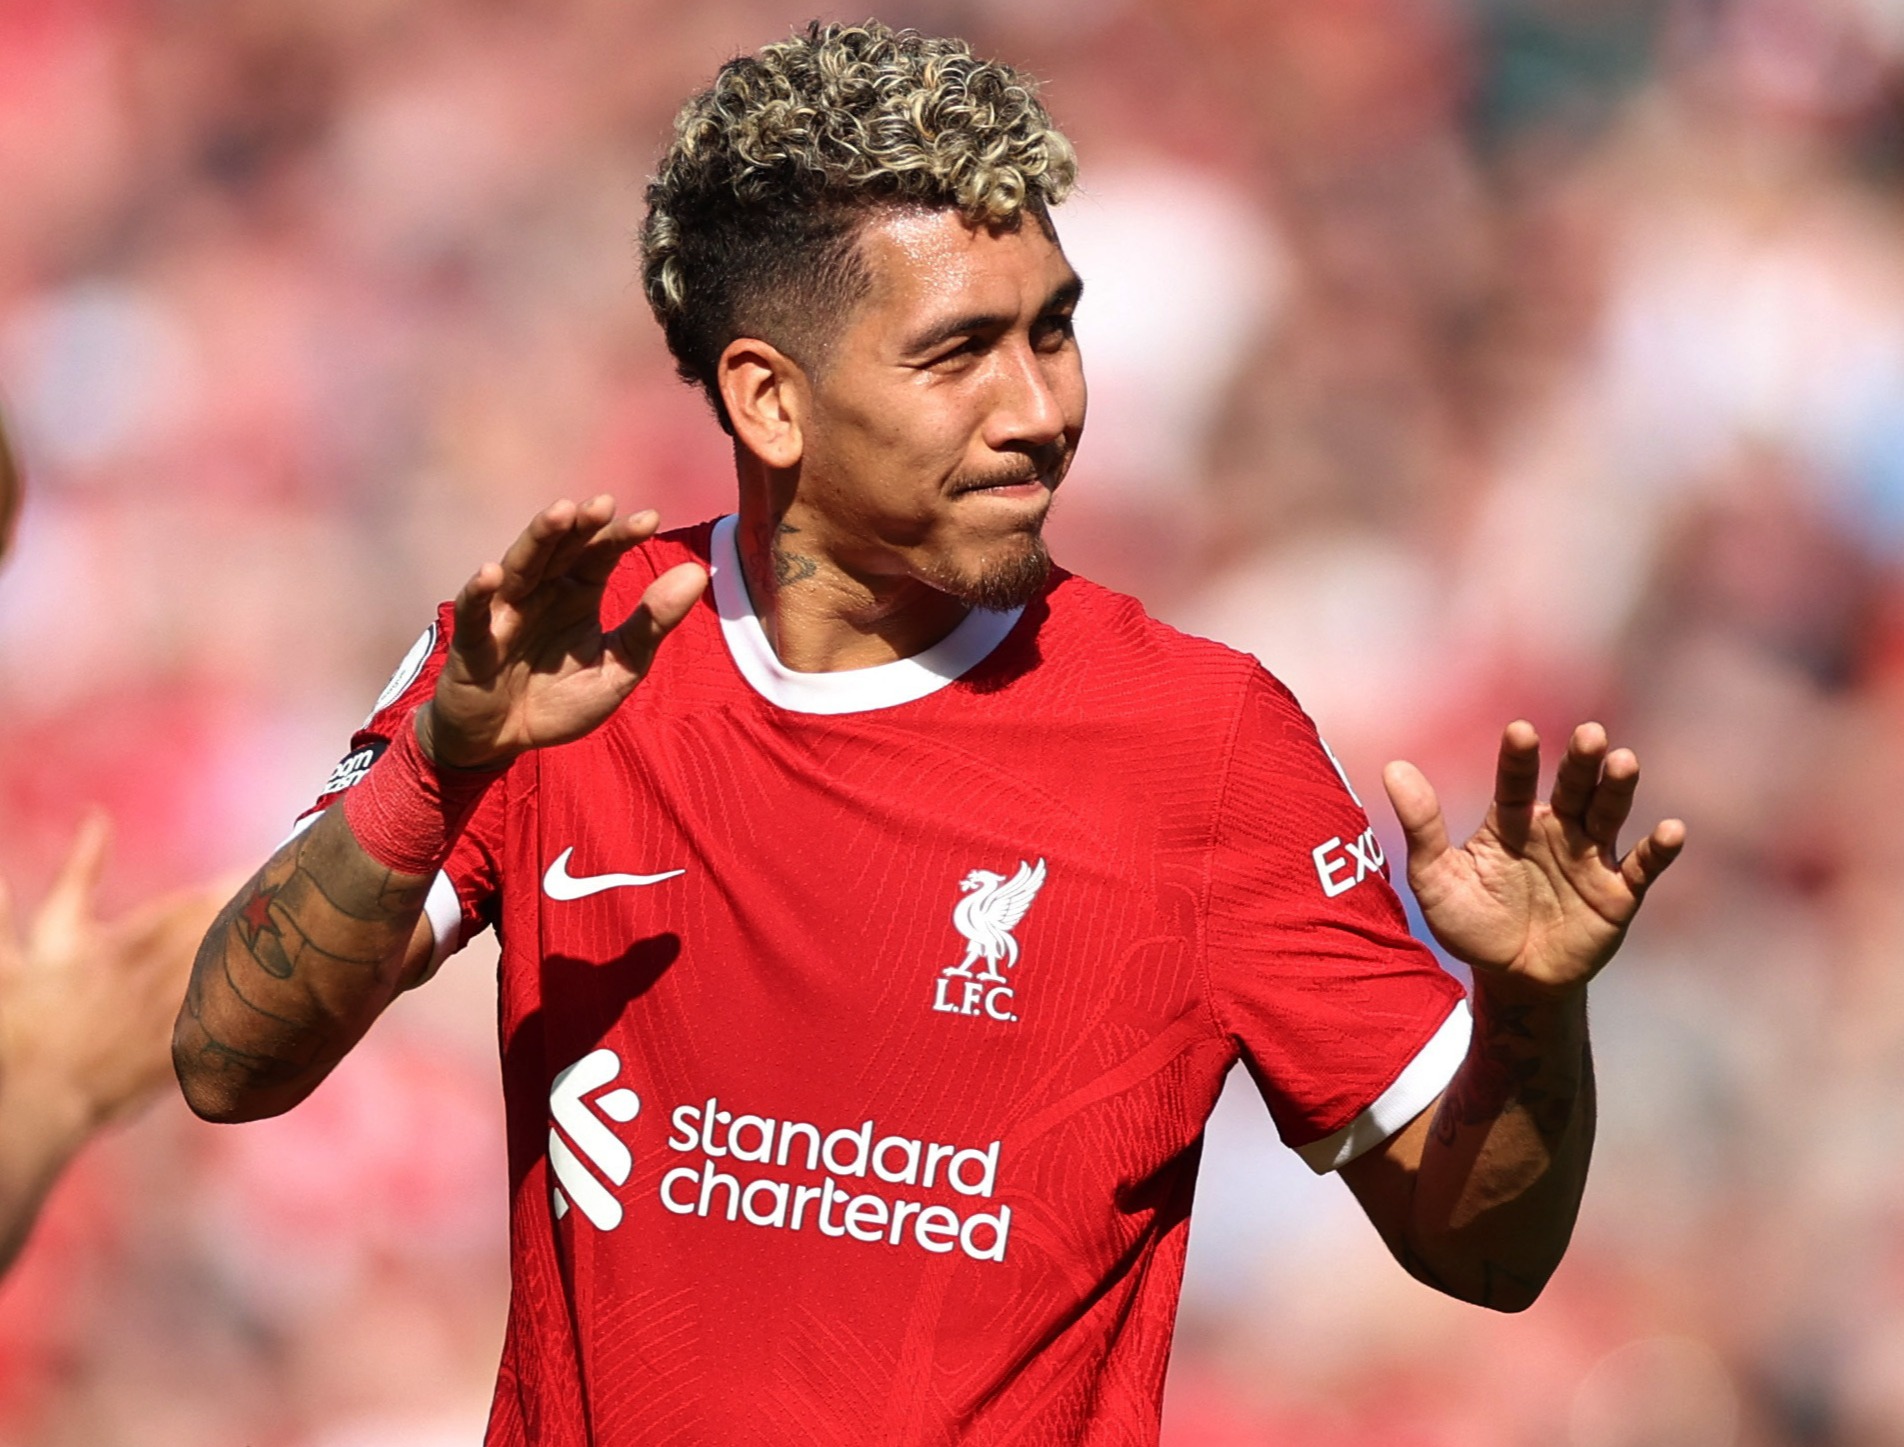 , Roberto Firmino in tears as he leaves Anfield pitch for final time after snatching last-gasp equaliser vs Aston Villa